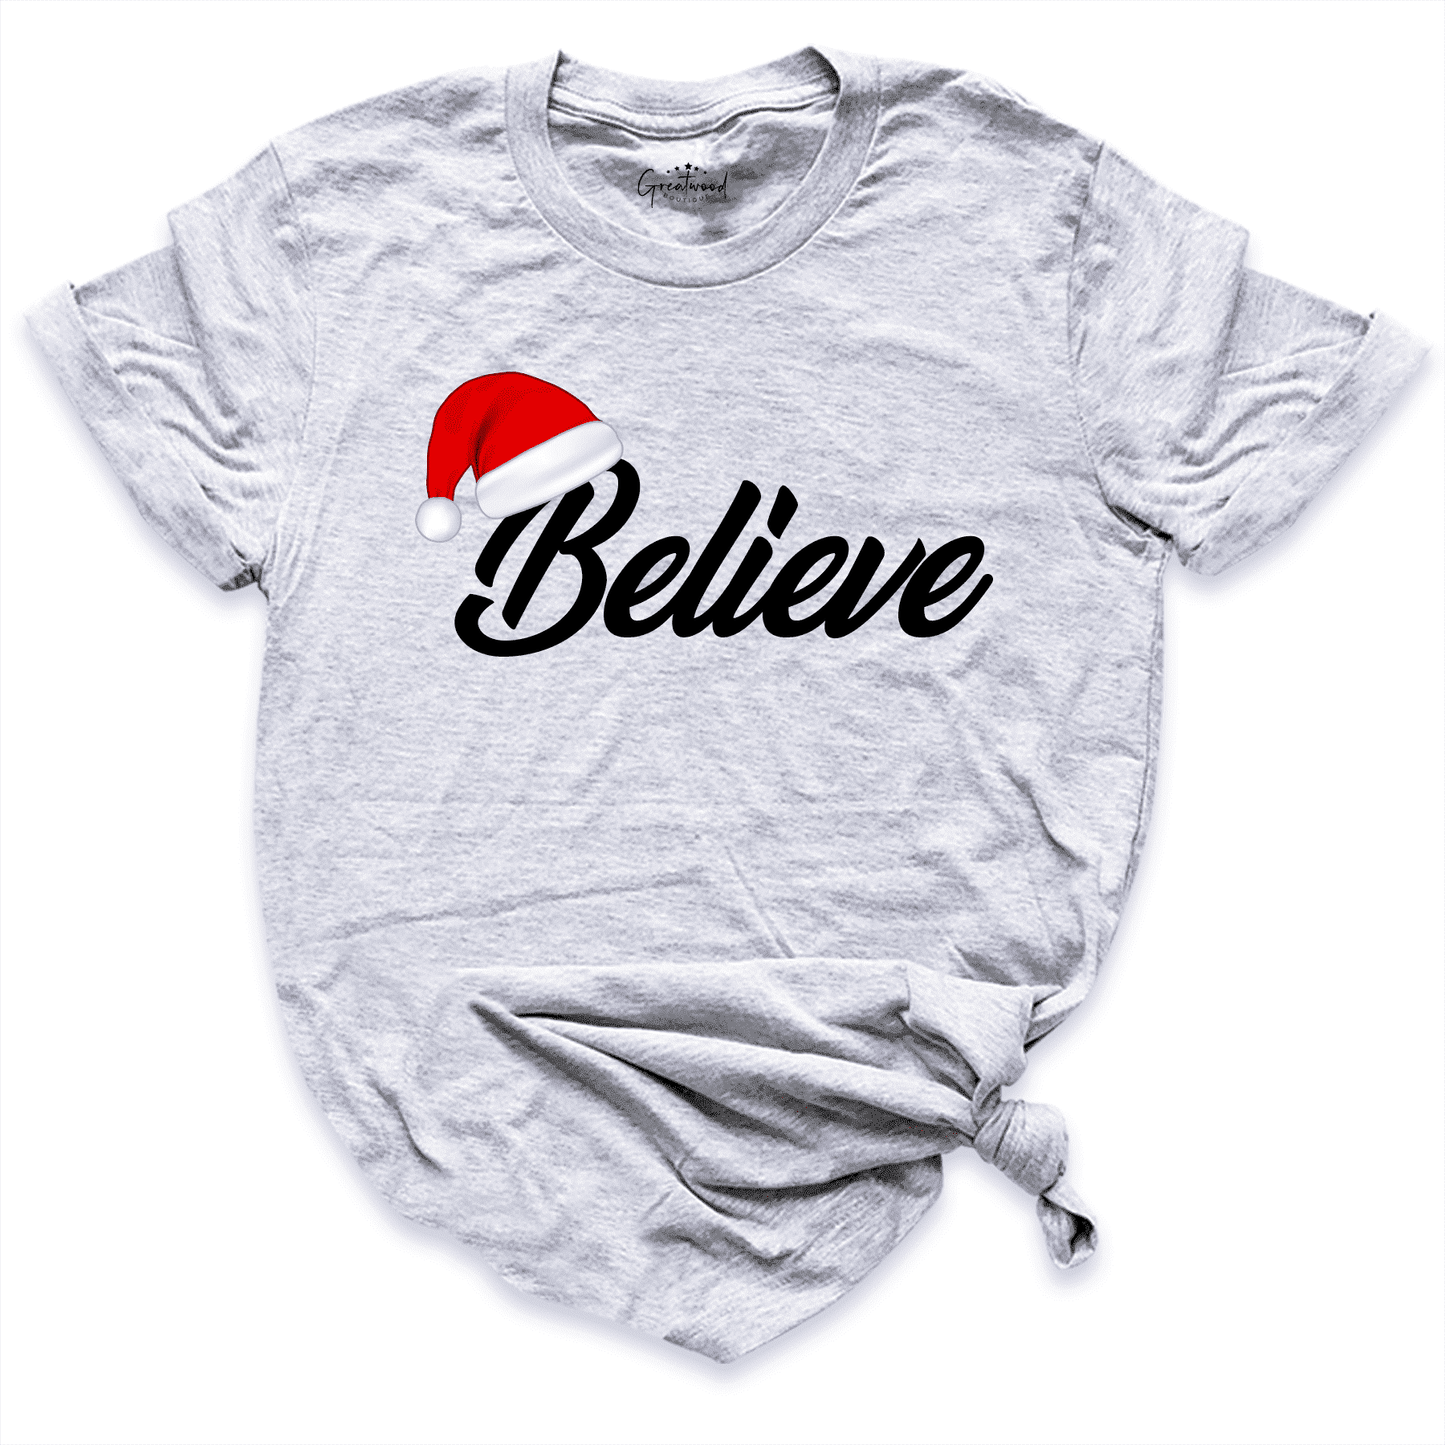 Believe Christmas Shirt Grey - Greatwood Boutique